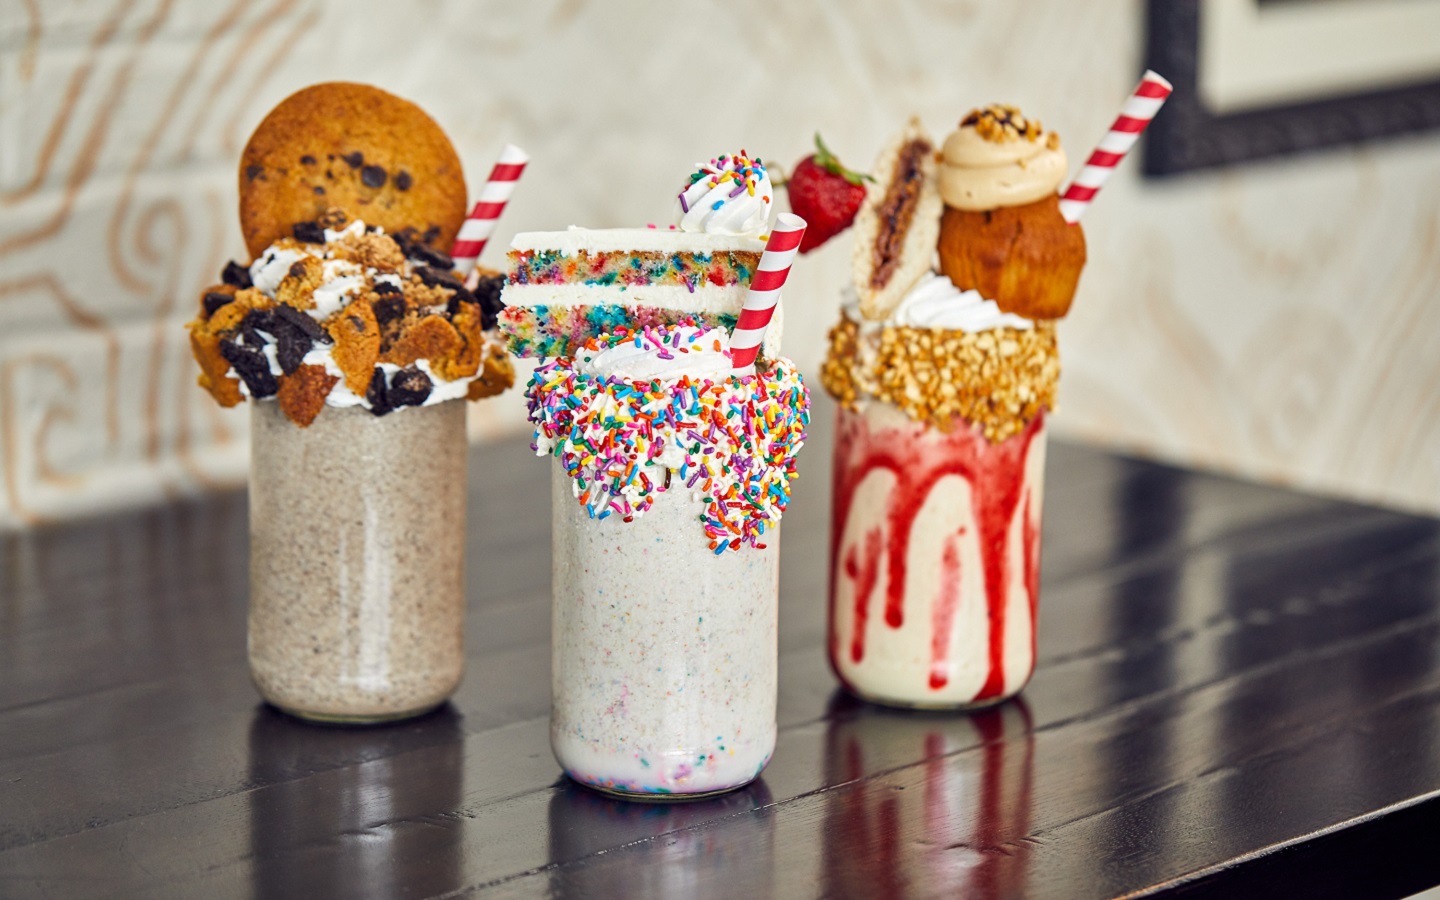 Food Services, Cookie Jar Milk Shake, Birthday Cake Milk Shake, Peanut Buttler and Jelly Sandwich Milk Shake, The Toothsome Chocolate Emporium and Savory Feast Kitchen, TCE, Project 749, Dining, Restaurants, Food, Meal, CityWalk Dining, Universal CityWalk